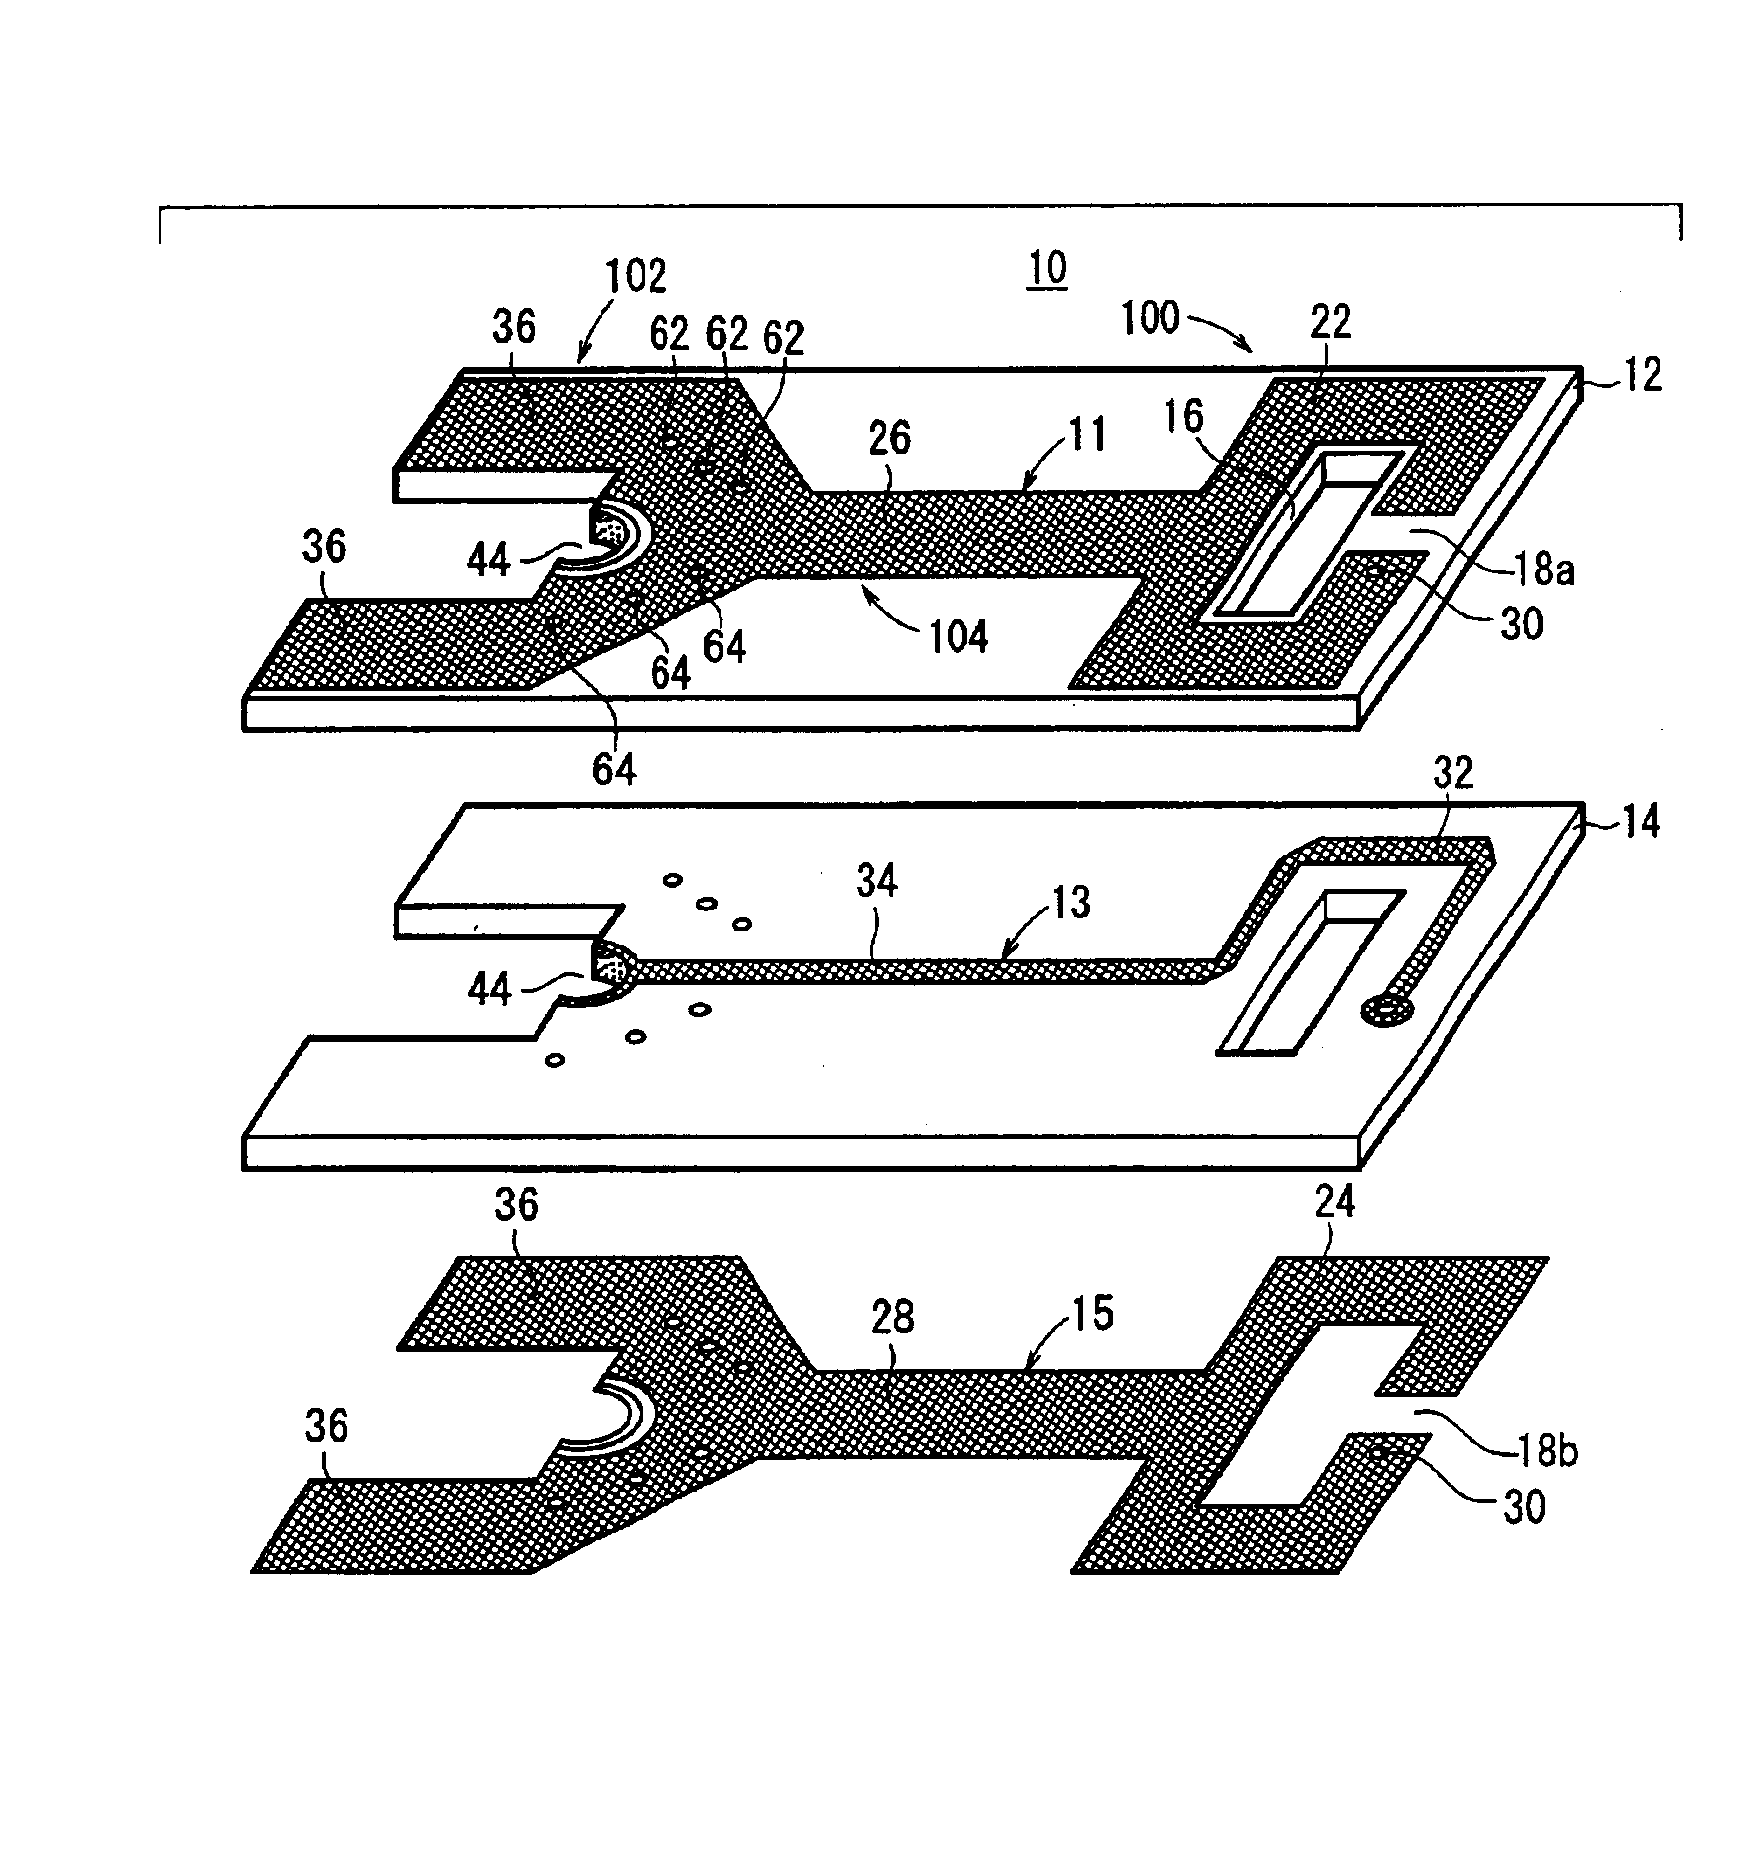 Magnetic sensor, side-opened TEM cell, and apparatus using such magnetic sensor and side-opened TEM cell